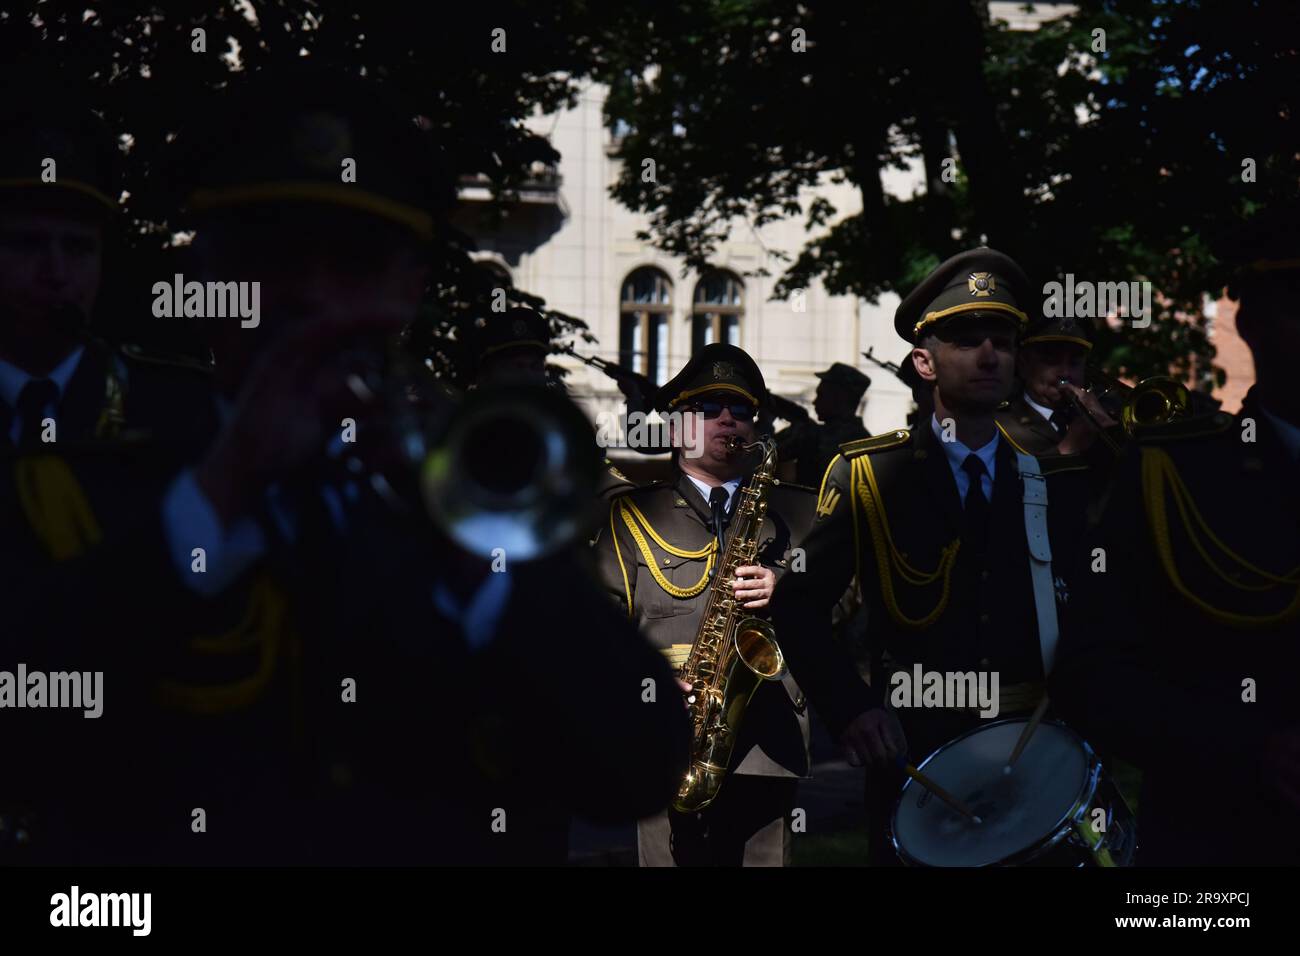 The military band during the celebration of the Constitution Day of Ukraine. Ukraine celebrated the 27th anniversary of the adoption of the country's basic law - the constitution. In the conditions of the Russian-Ukrainian war, official events were very short. In Lviv, the Ukrainian flag was raised, honor guard marched, and a military band performed. (Photo by Pavlo Palamarchuk / SOPA mages/Sipa USA) Stock Photo